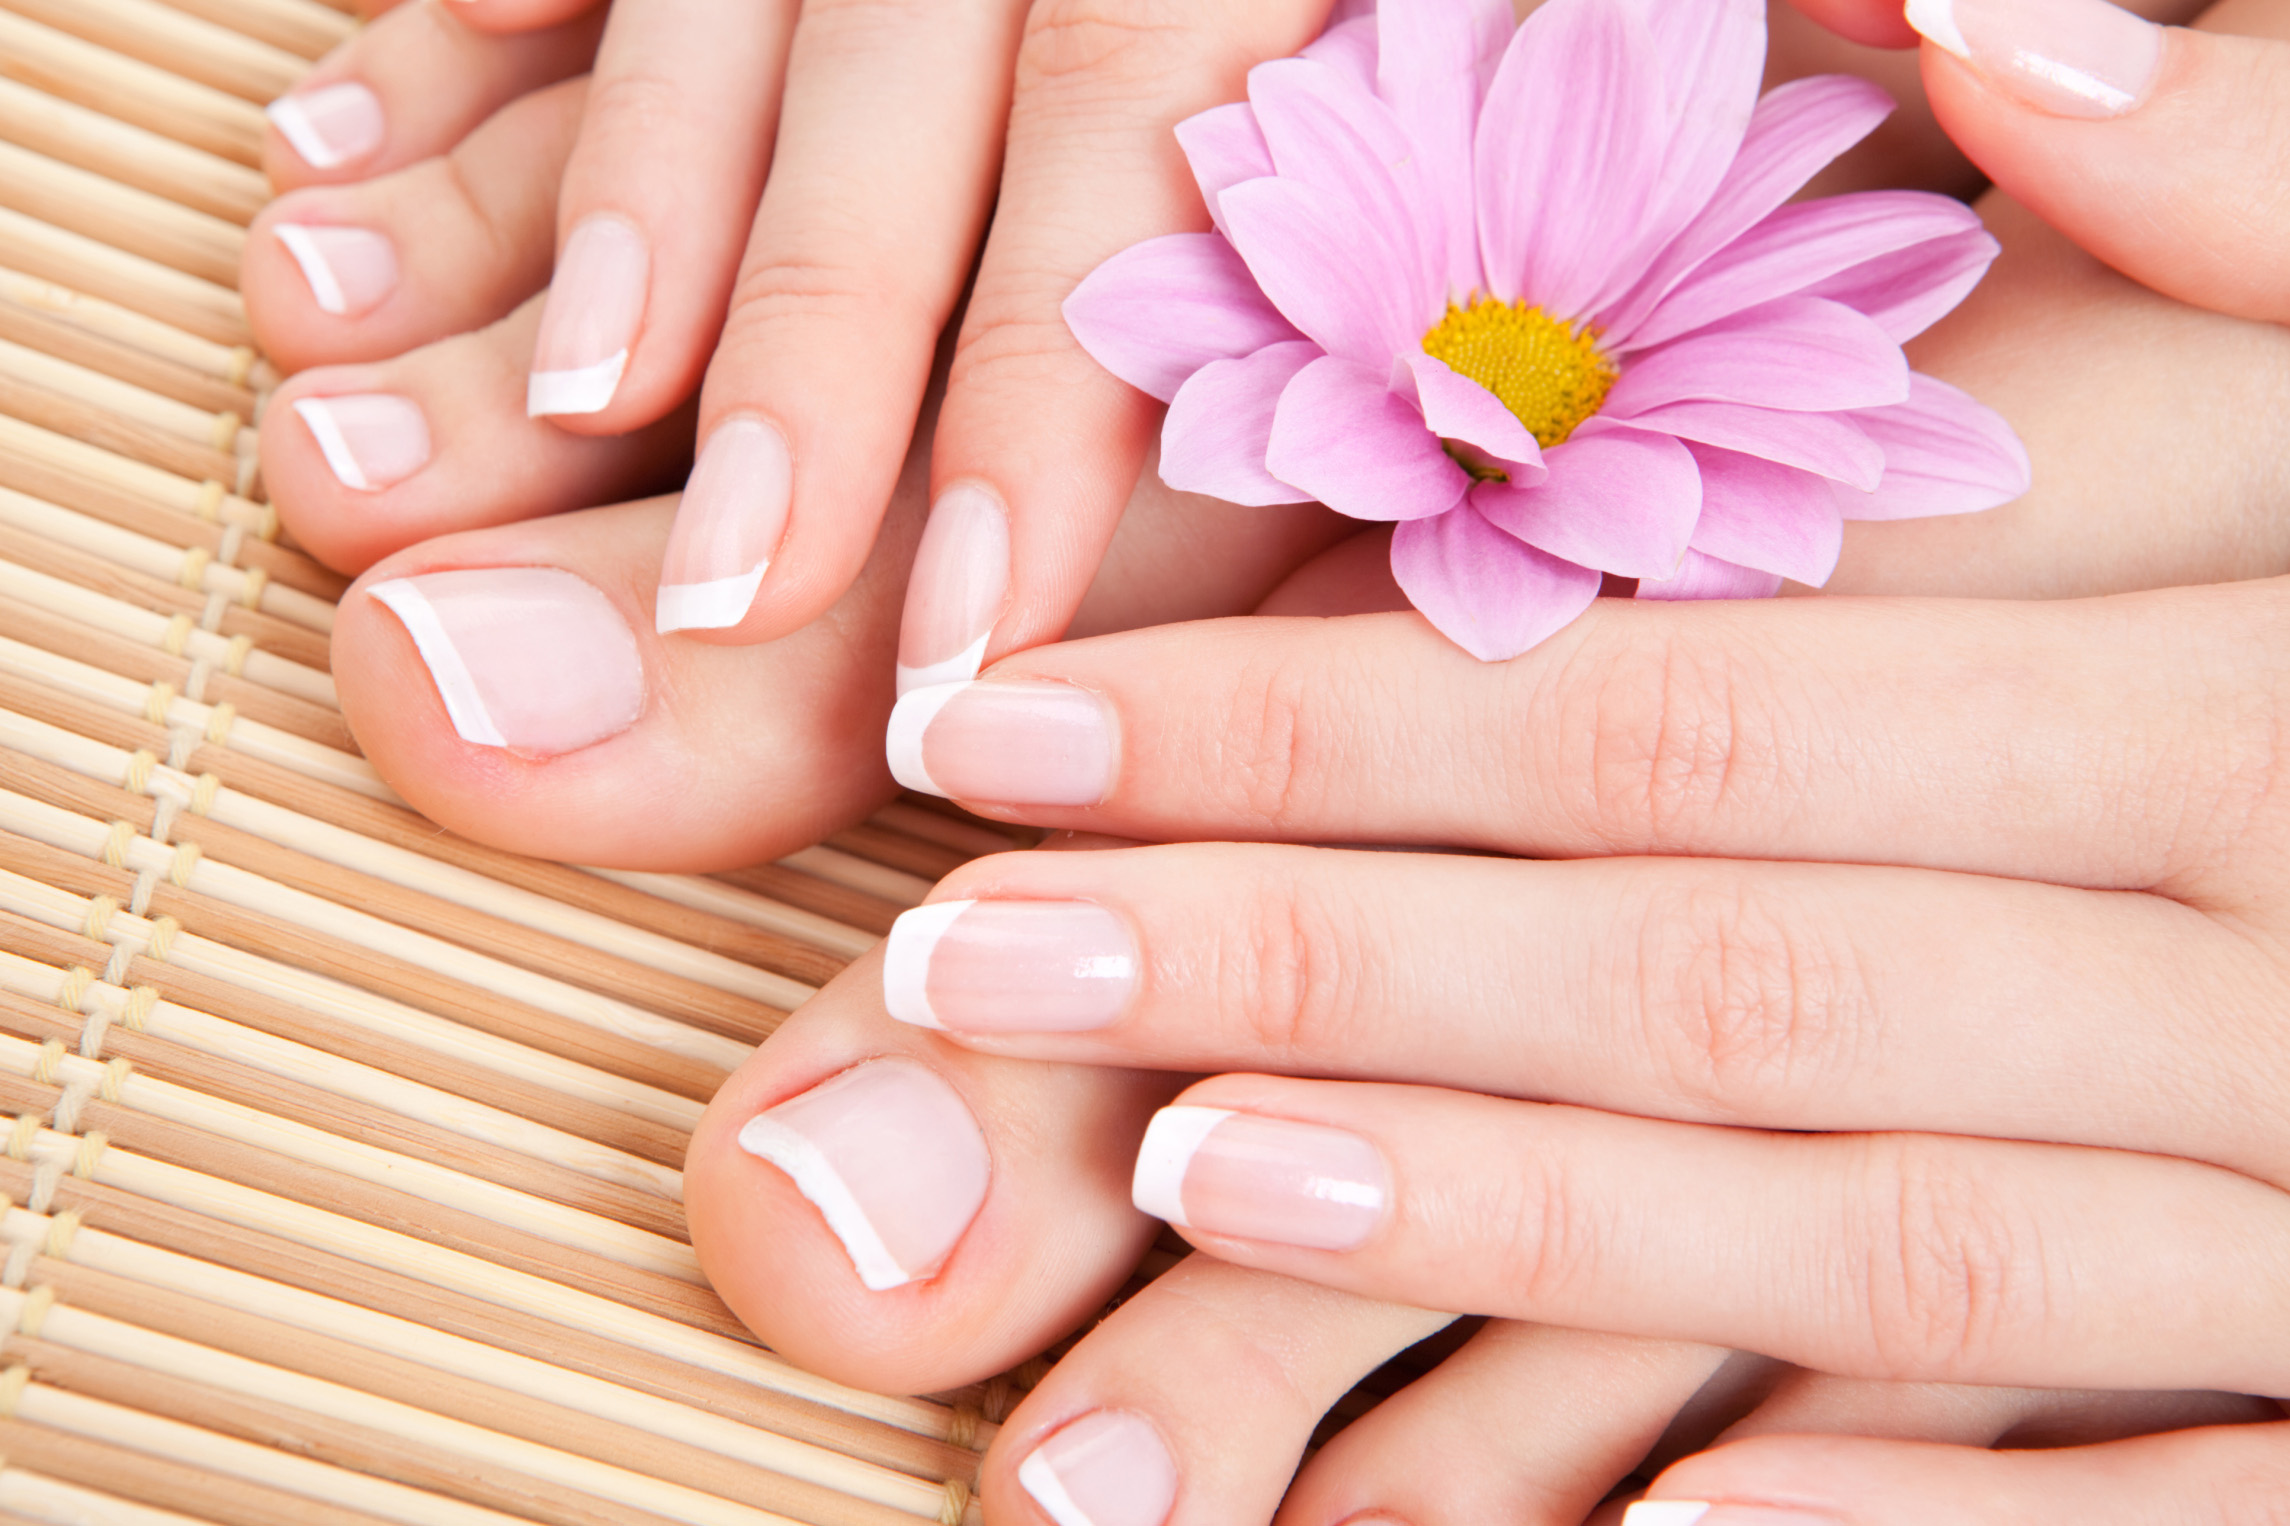 10. The Best Nail Care Tips for Maintaining a Matte Manicure - wide 4